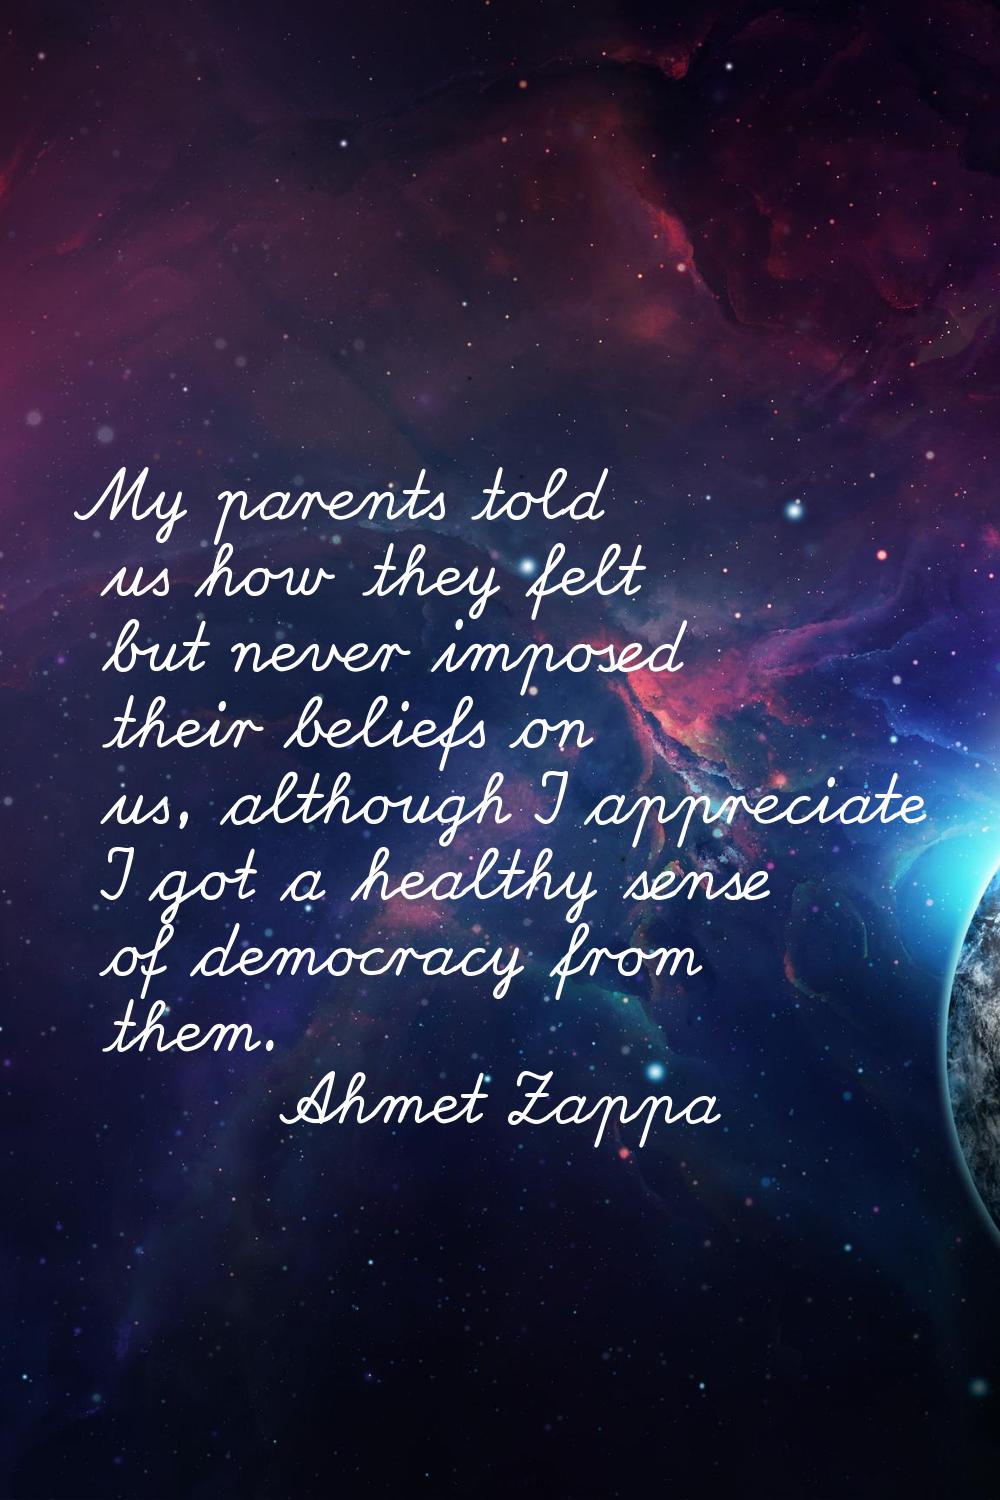 My parents told us how they felt but never imposed their beliefs on us, although I appreciate I got